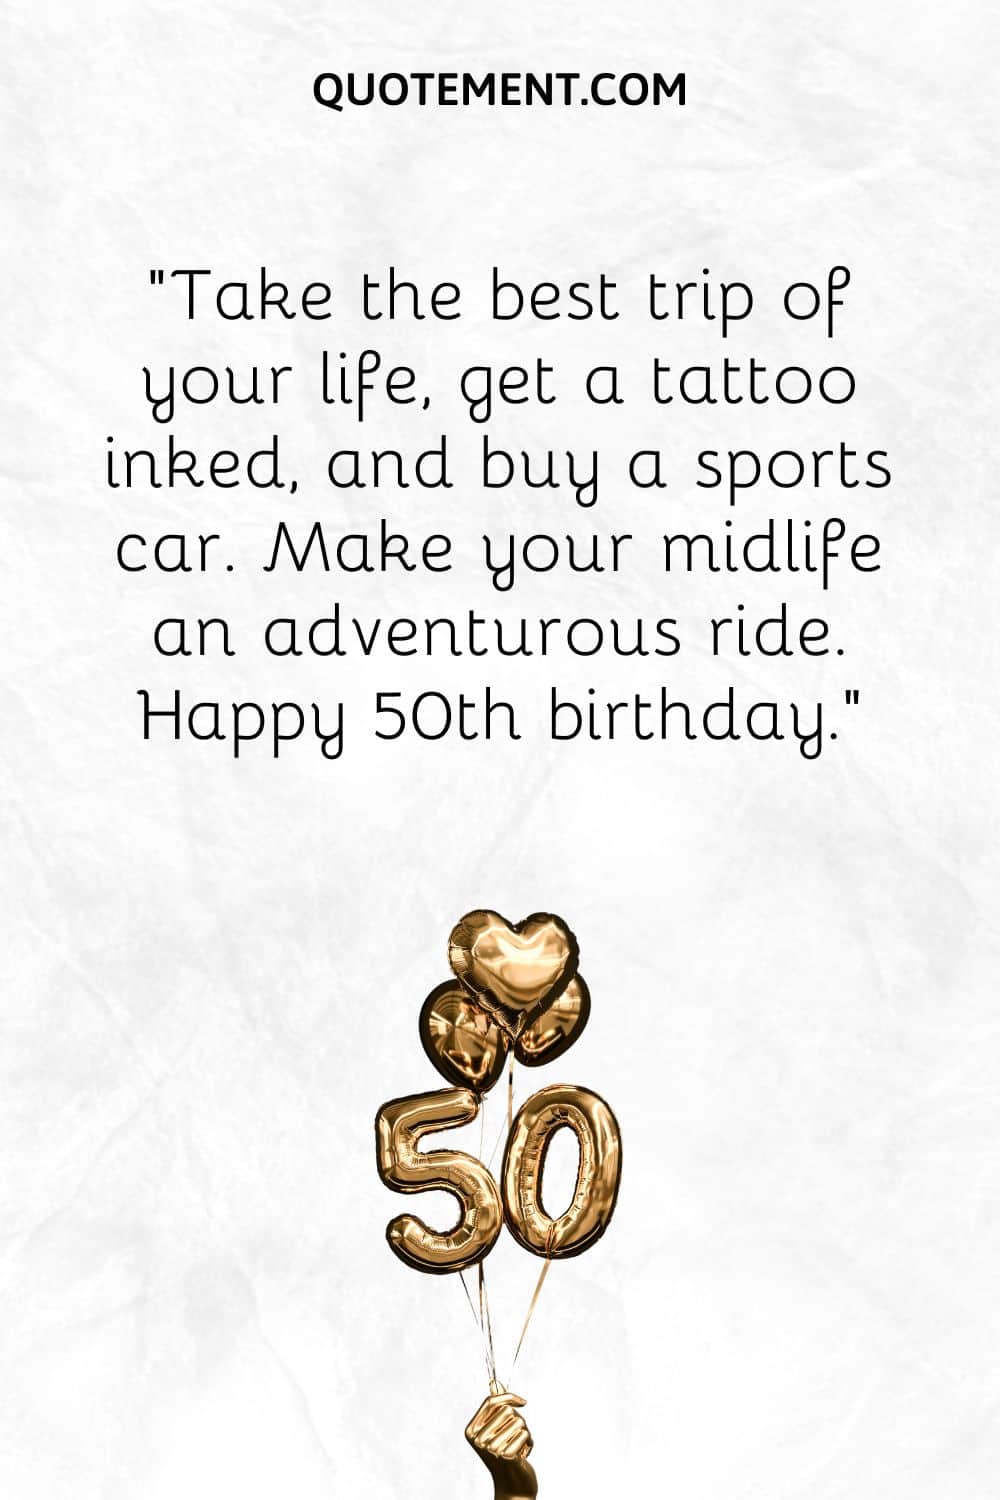 “Take the best trip of your life, get a tattoo inked, and buy a sports car. Make your midlife an adventurous ride. Happy 50th birthday.”